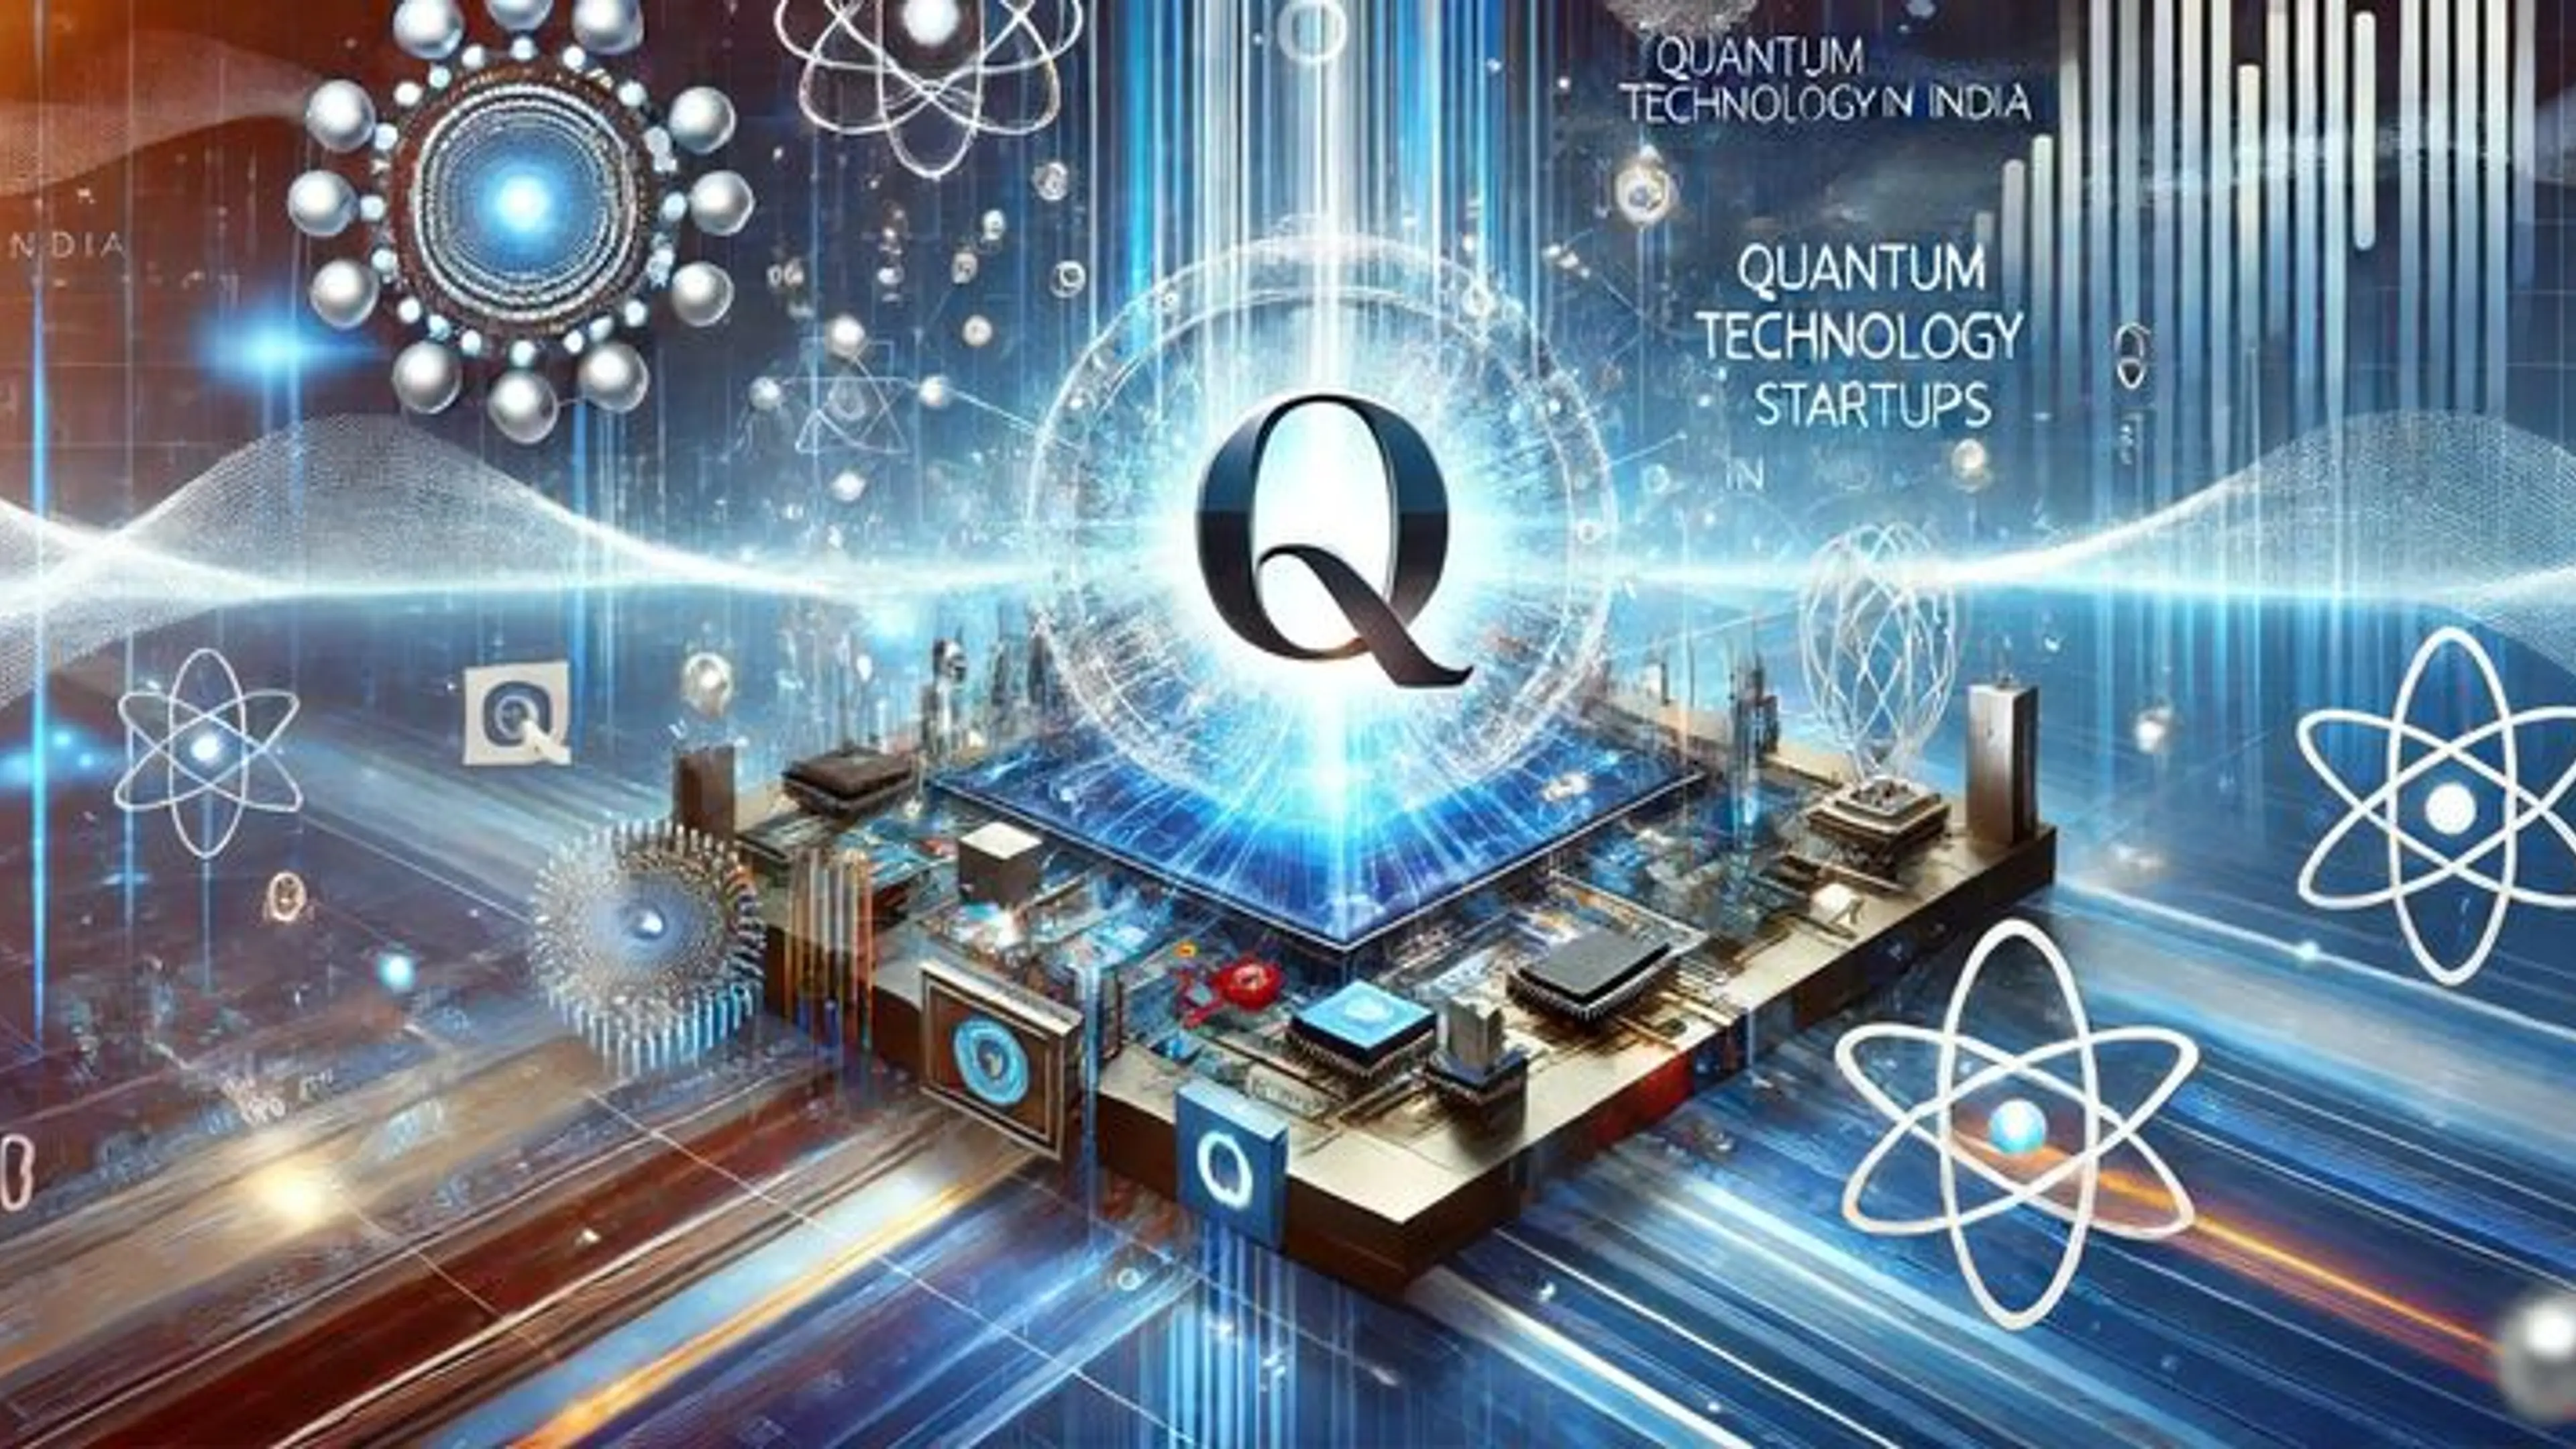 Betting on the Future: Top Quantum Technology Startups in India